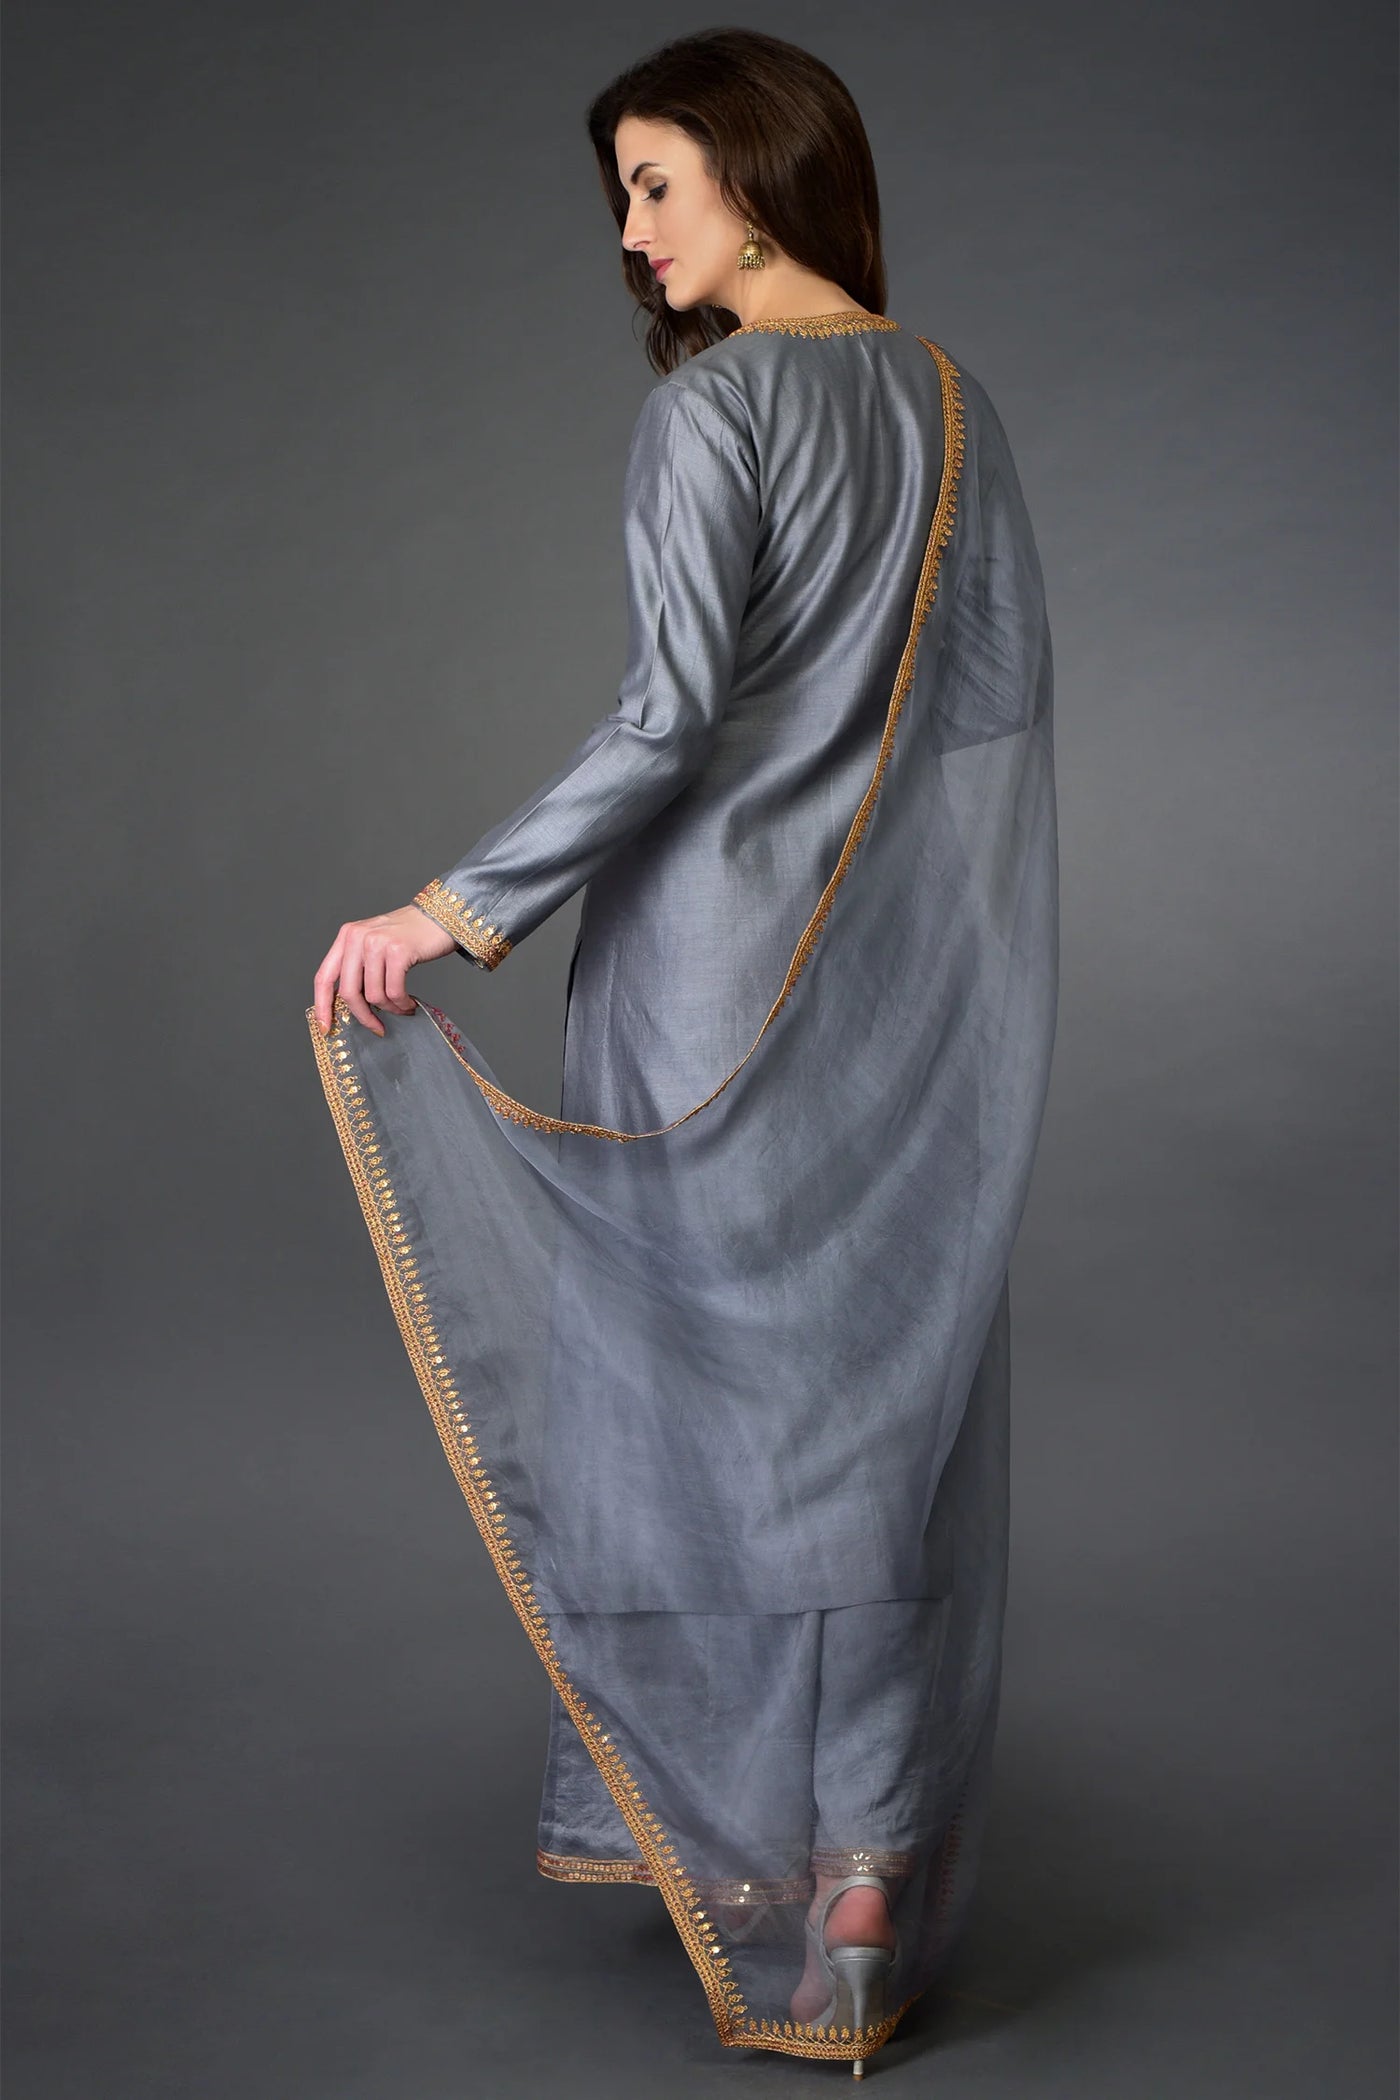 Gray Chanderi Silk Kurta Set Indian Clothing in Denver, CO, Aurora, CO, Boulder, CO, Fort Collins, CO, Colorado Springs, CO, Parker, CO, Highlands Ranch, CO, Cherry Creek, CO, Centennial, CO, and Longmont, CO. NATIONWIDE SHIPPING USA- India Fashion X